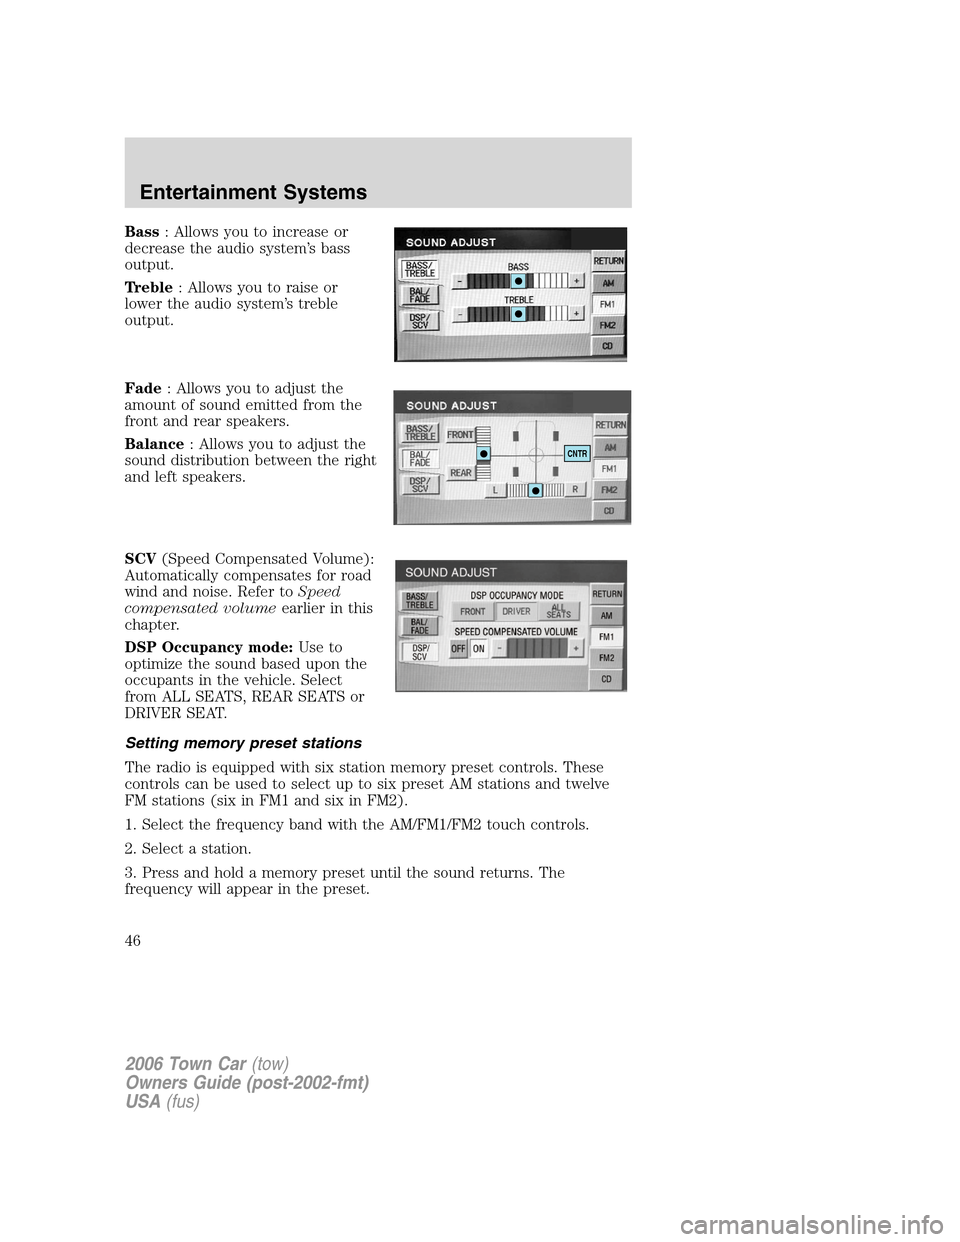 LINCOLN TOWN CAR 2006 Service Manual Bass: Allows you to increase or
decrease the audio system’s bass
output.
Treble: Allows you to raise or
lower the audio system’s treble
output.
Fade: Allows you to adjust the
amount of sound emitt